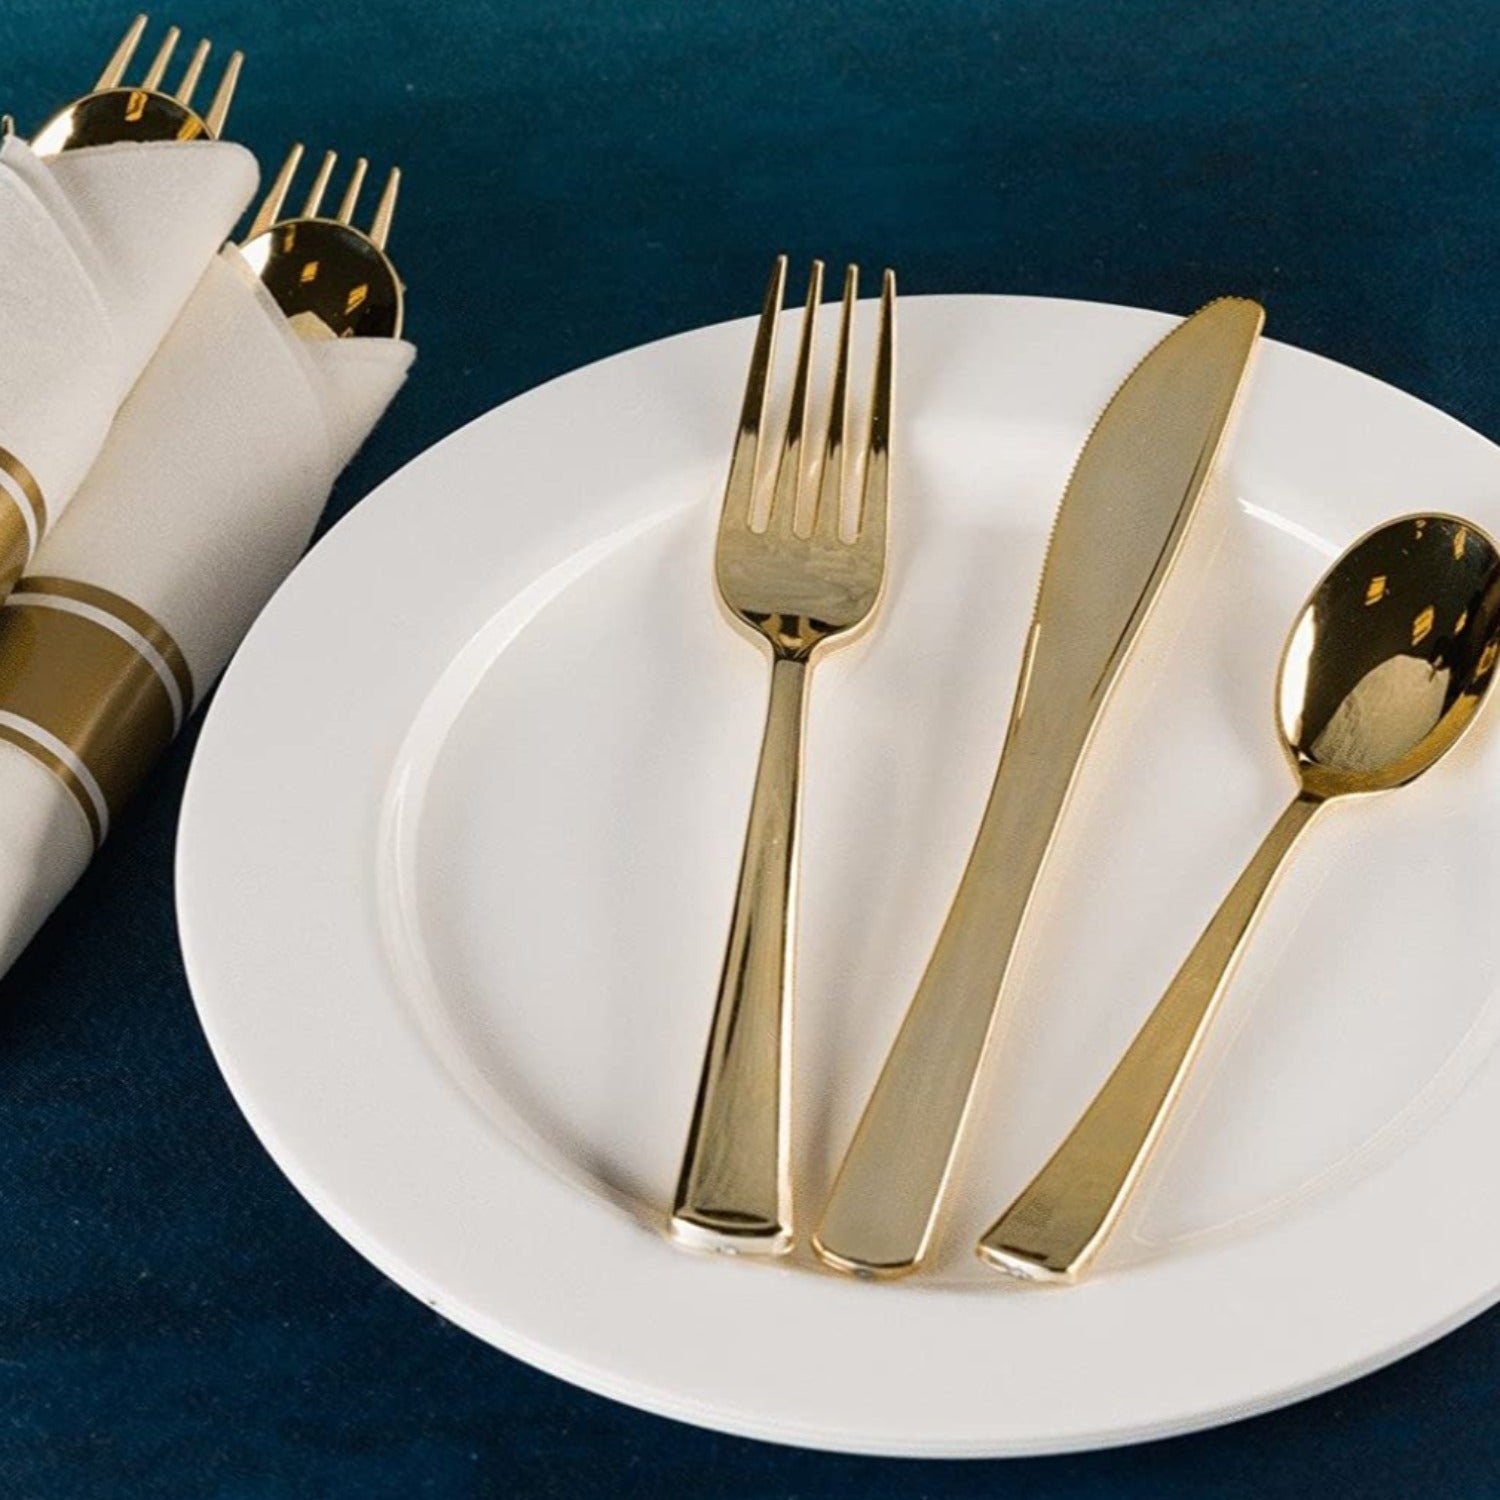 Pre-Rolled set Cutlery Combo Spoon, Knife, Forks and Napkin Polished Gold Tablesettings Lillian   